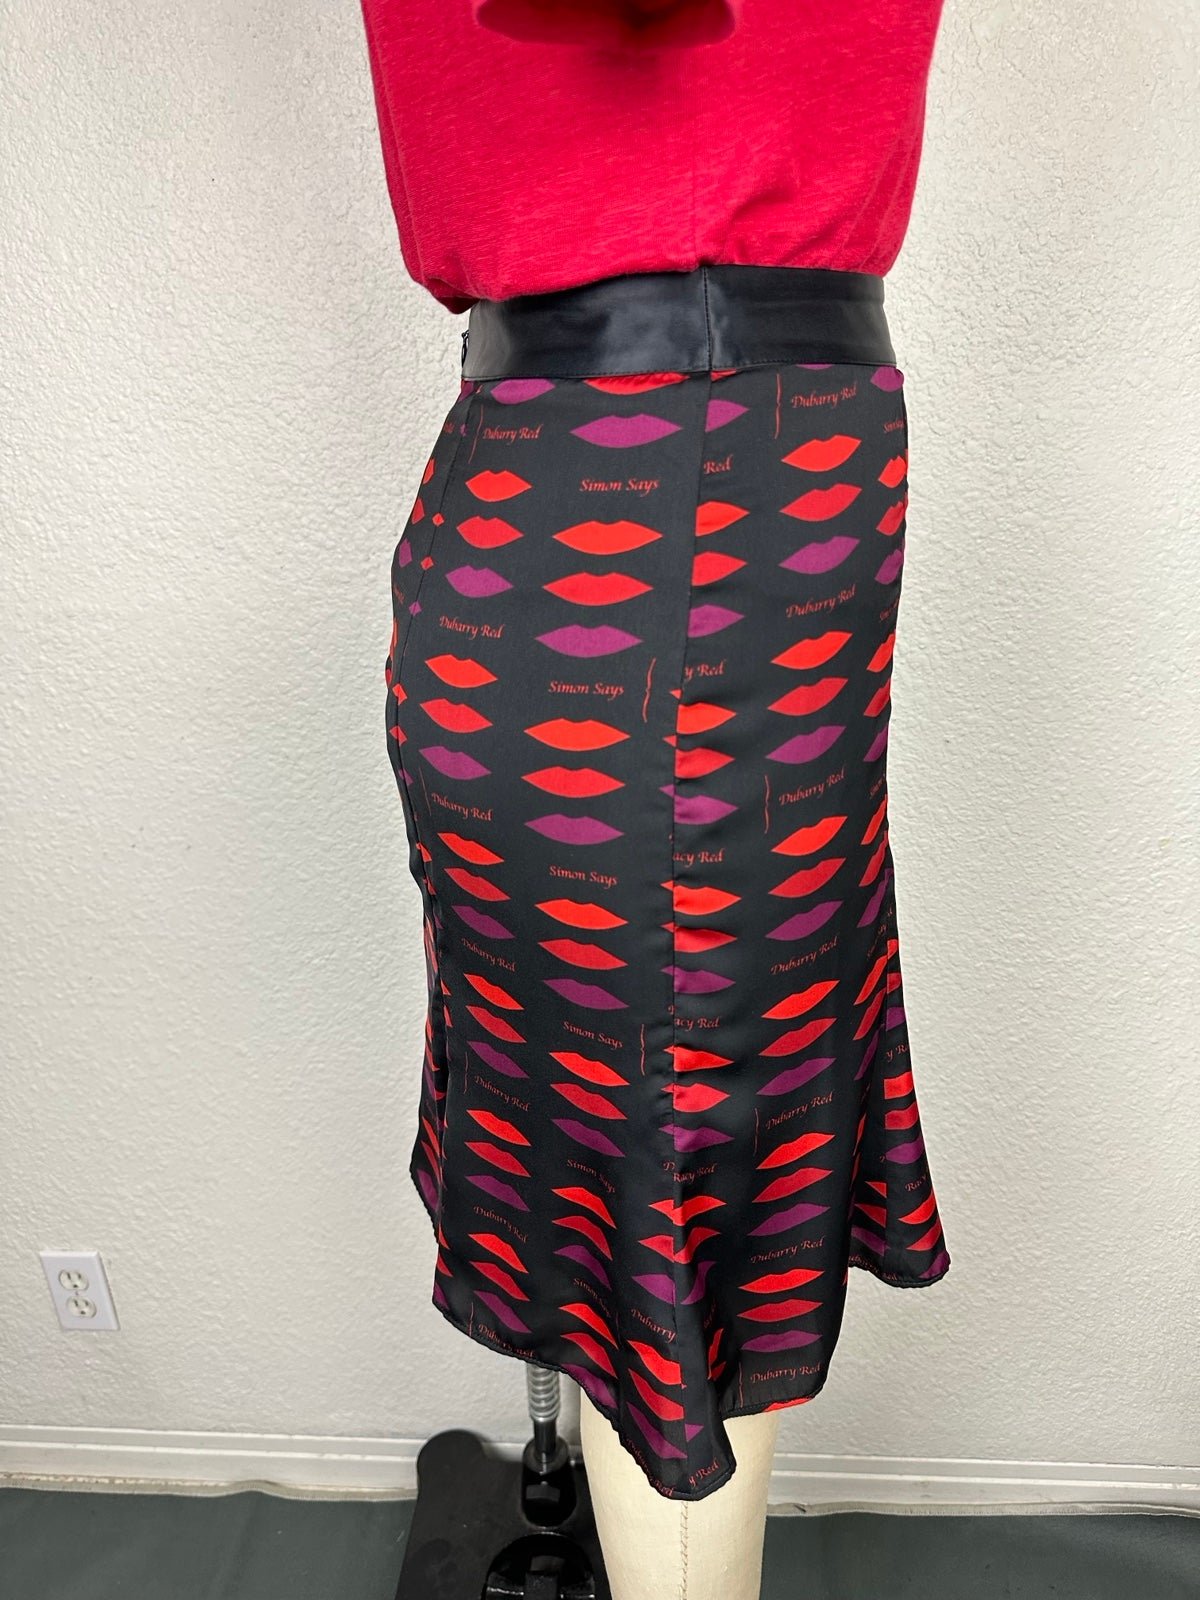 Classic Banana Republic Skirt Size 10 Black/Red Silky Fited/Flow hnq1jqQKH for sale